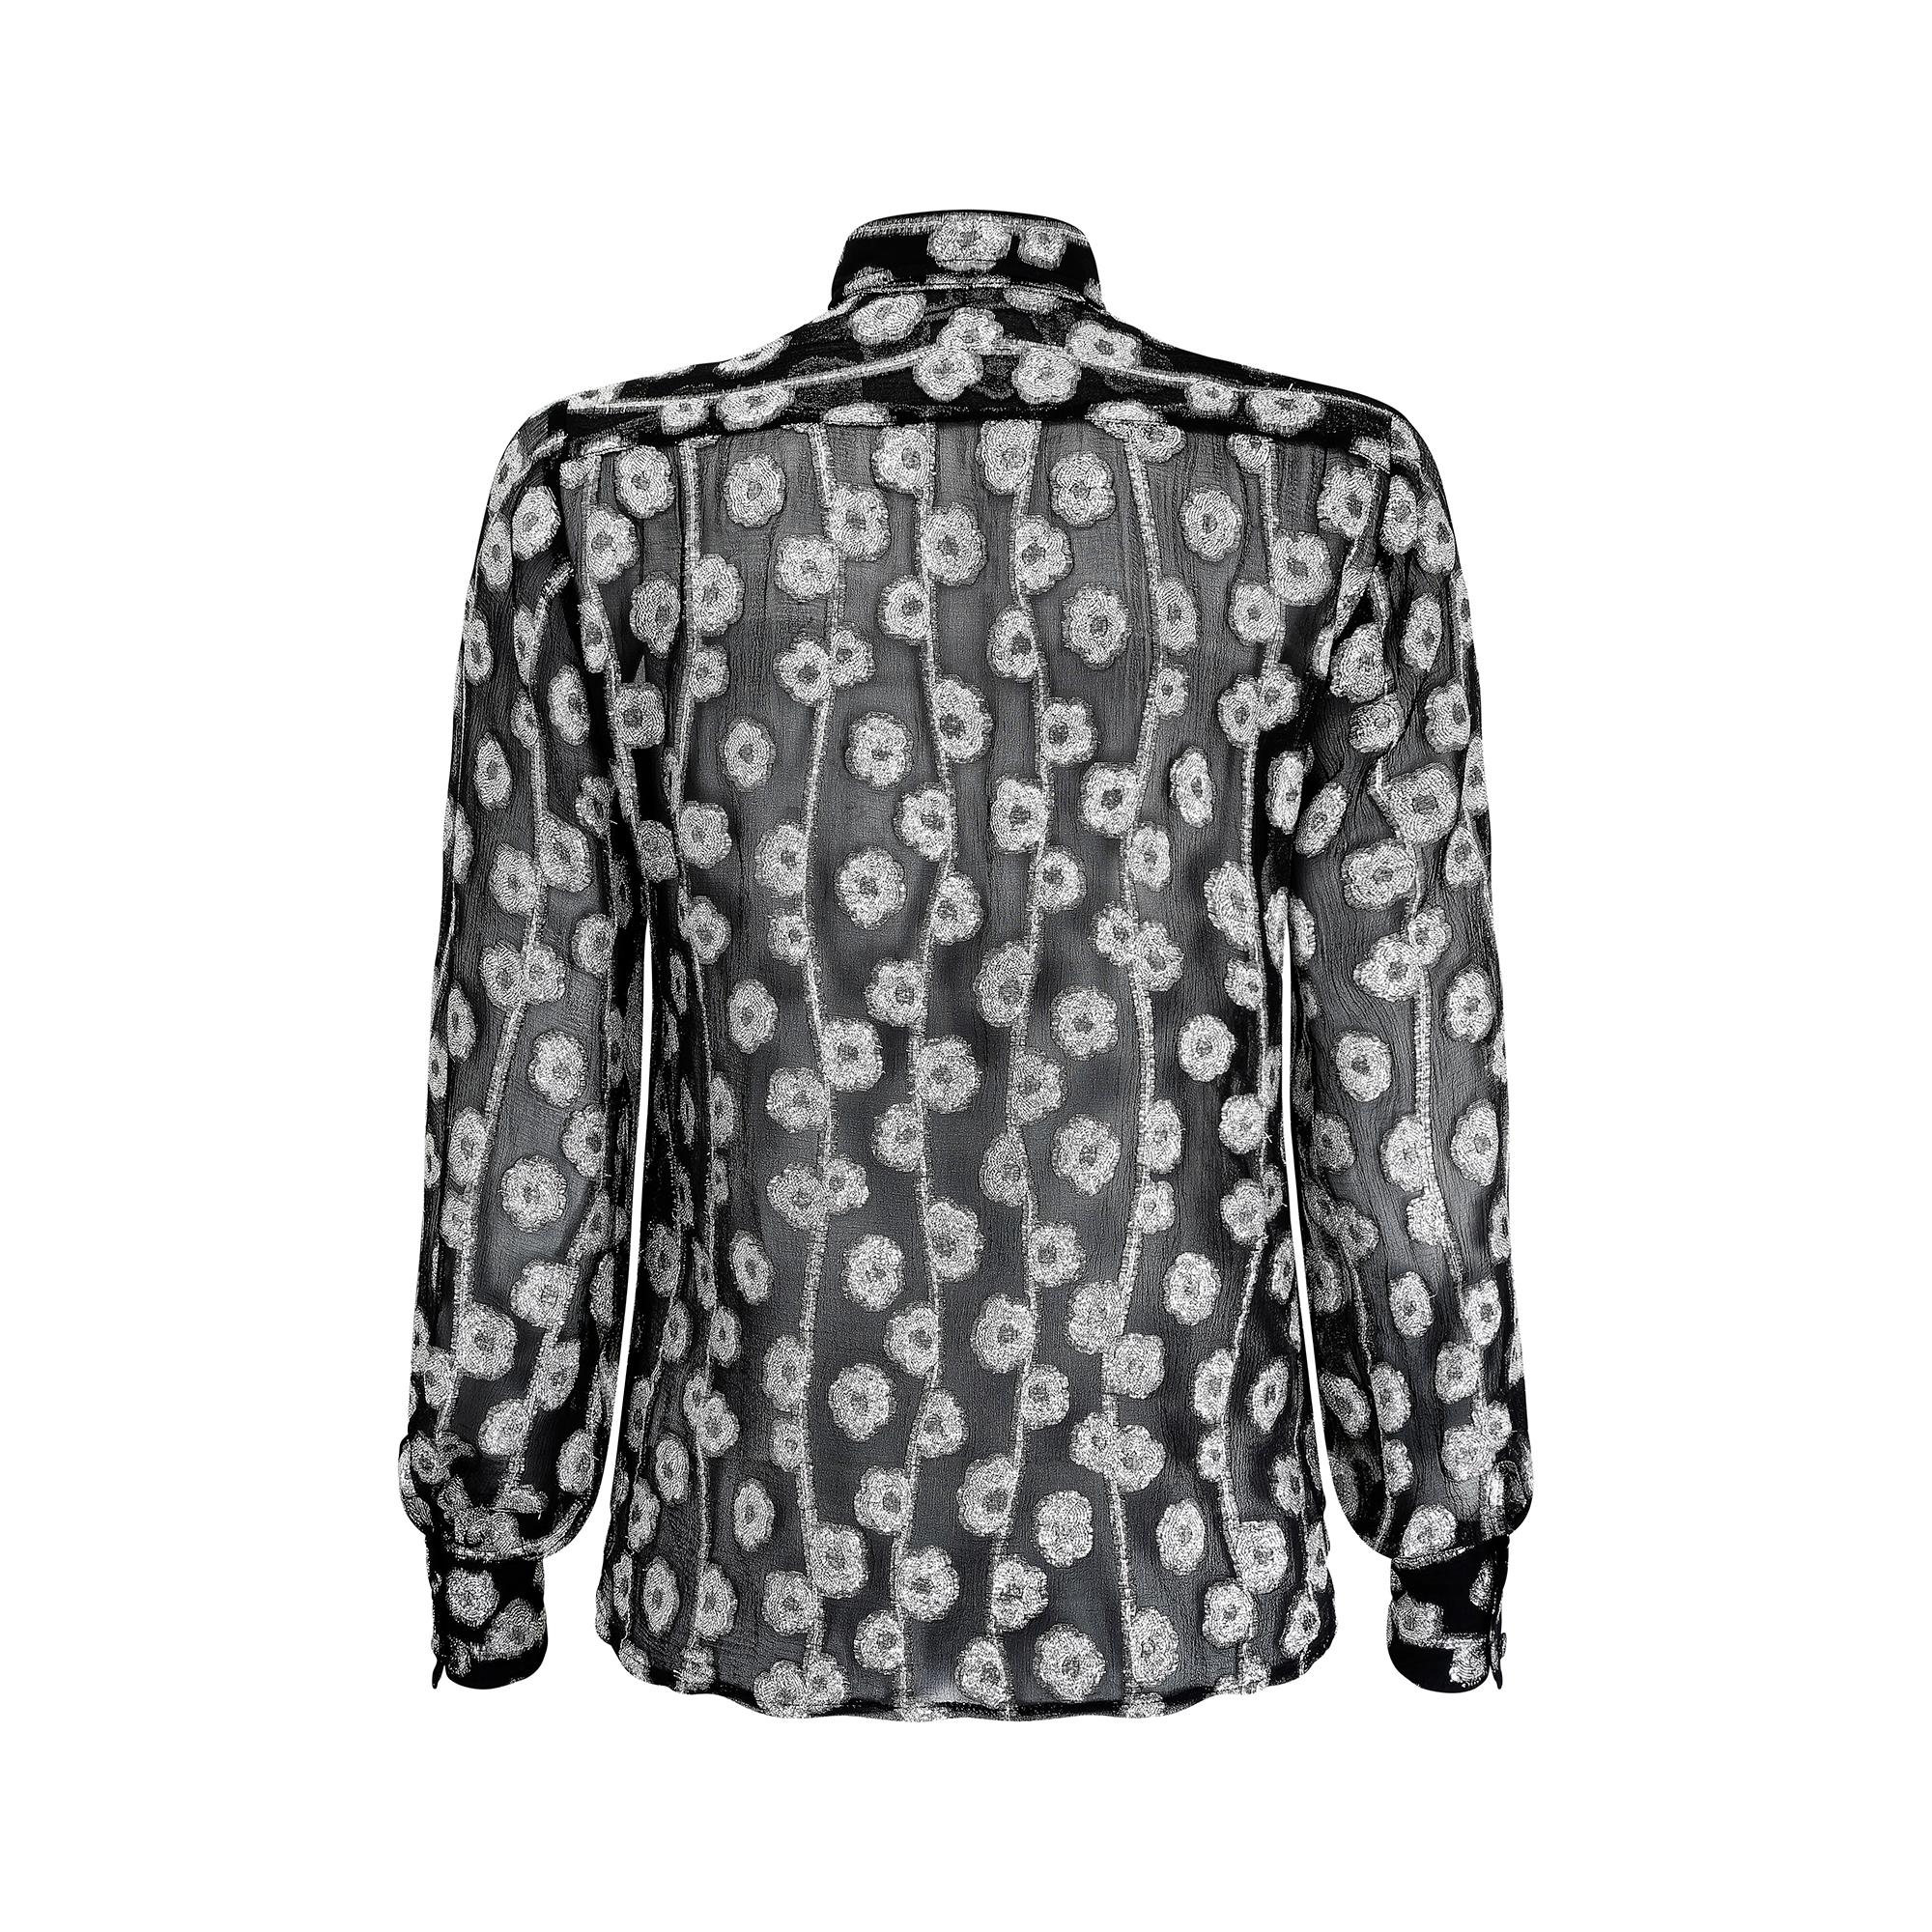 Women's 1970s Karl Lagerfeld for Chloe Black and Silver Silk Blouse